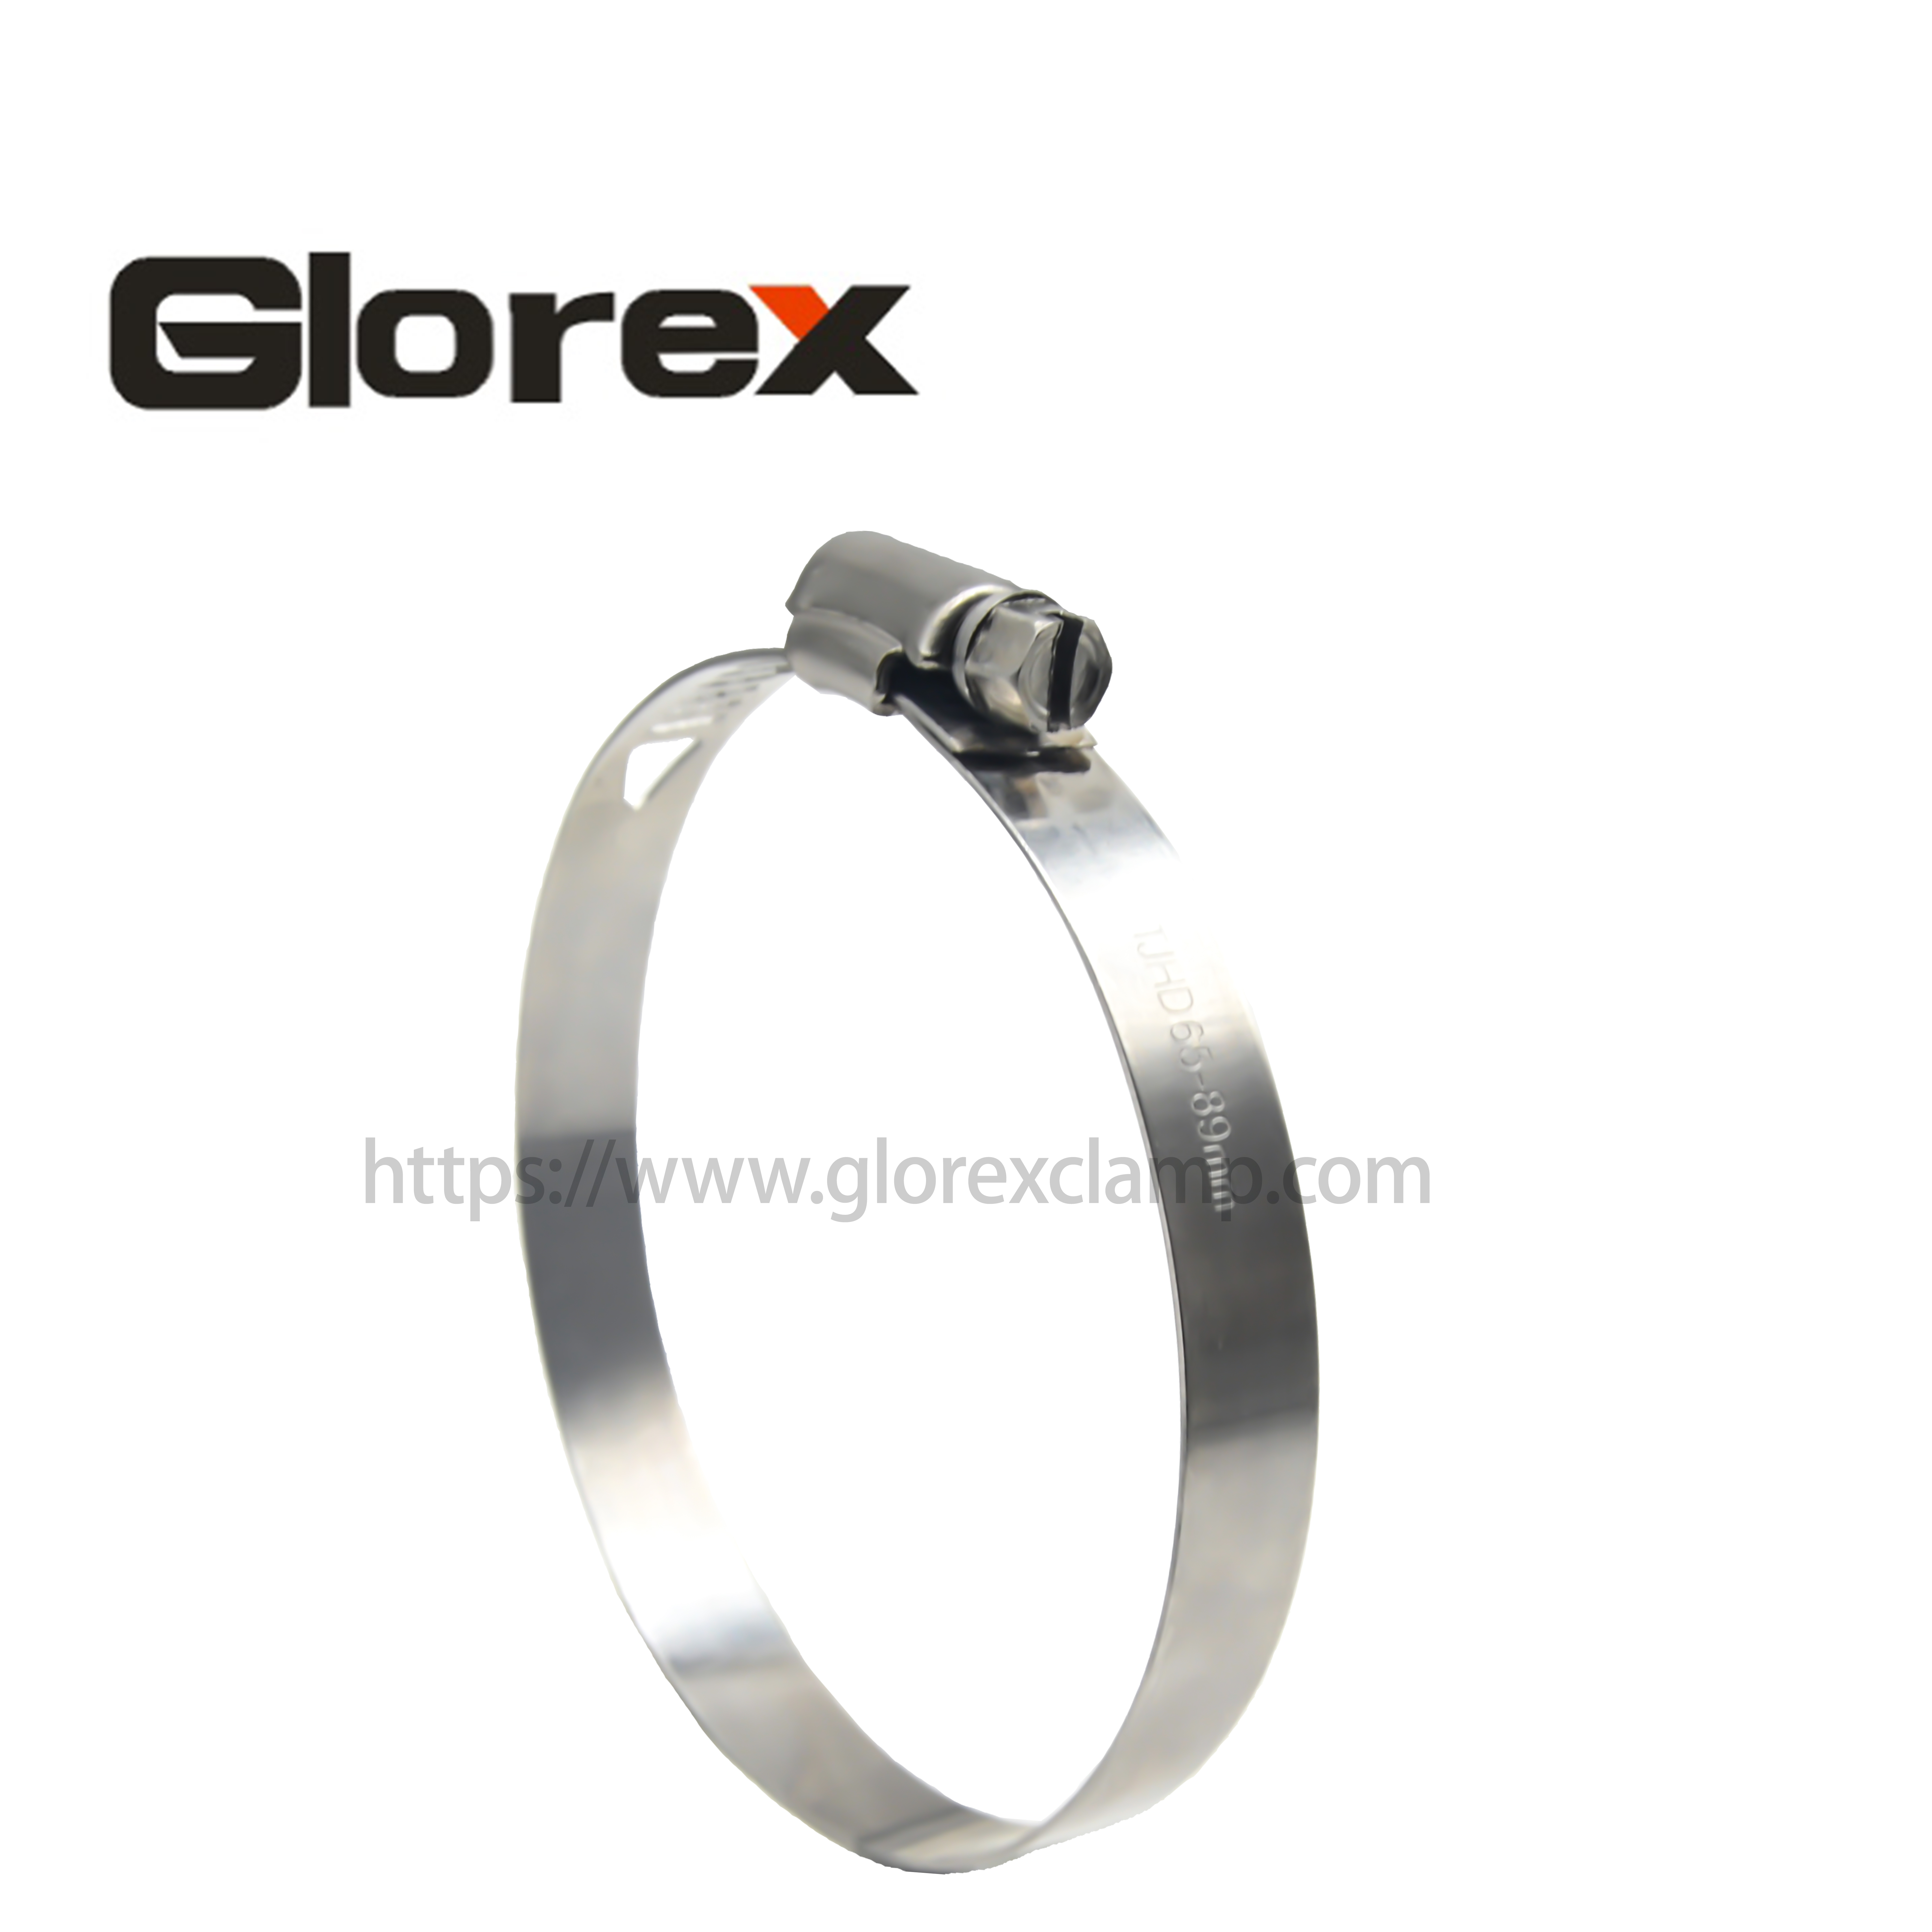 PriceList for Robust Hose Clamp - 10mm American type hose clmp – Glorex